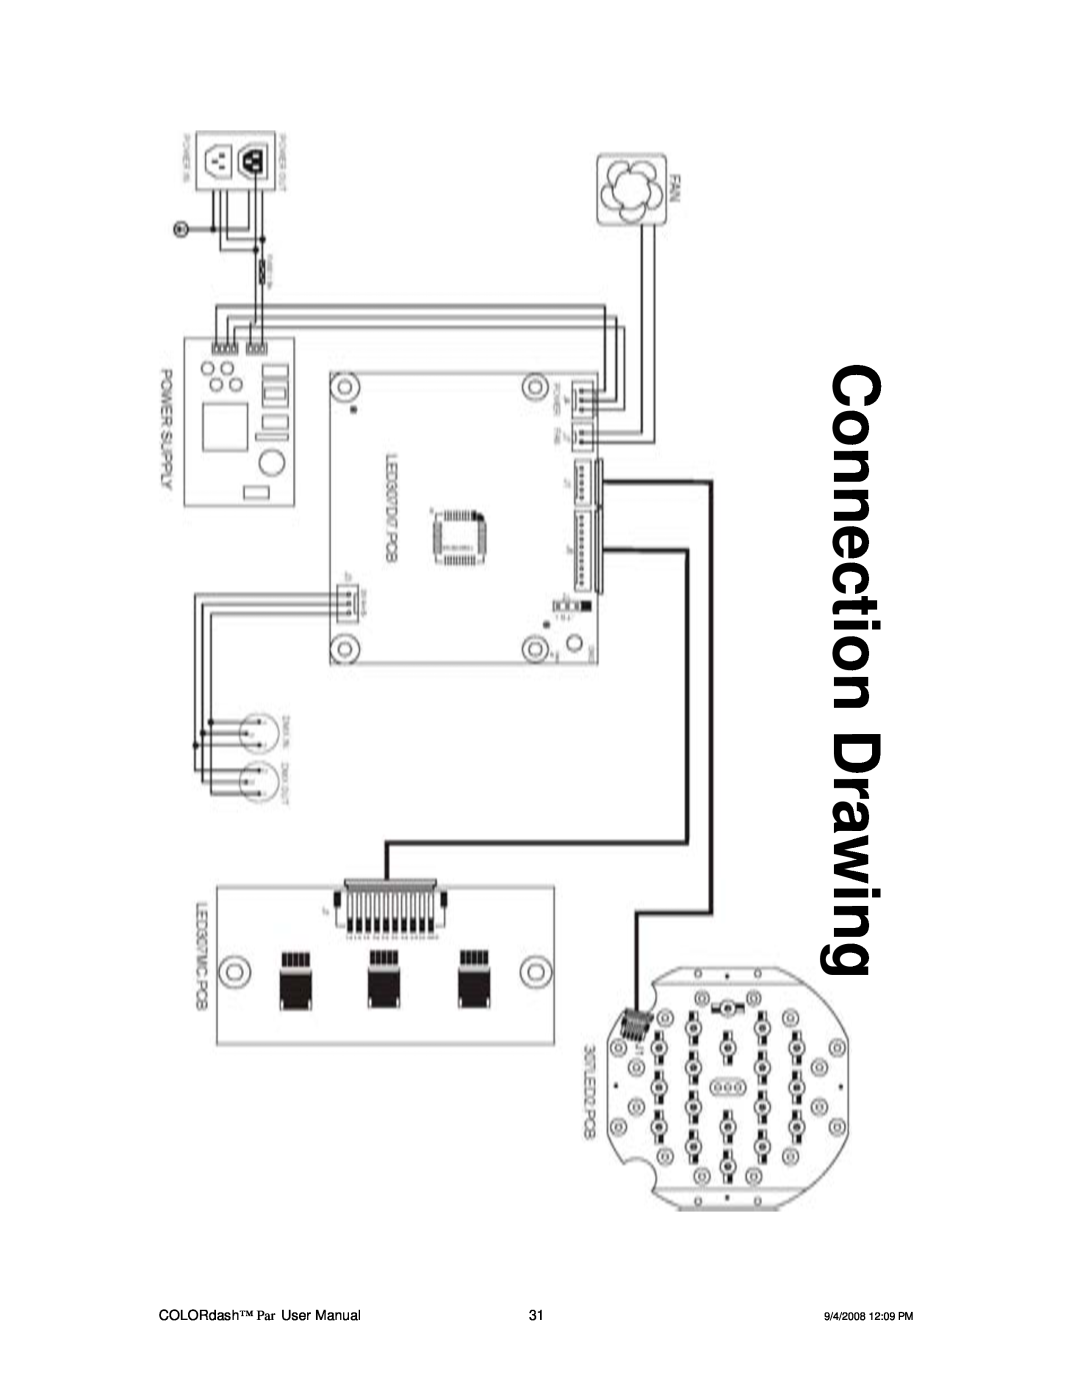 Chauvet DMX512 user manual Connection Drawing 